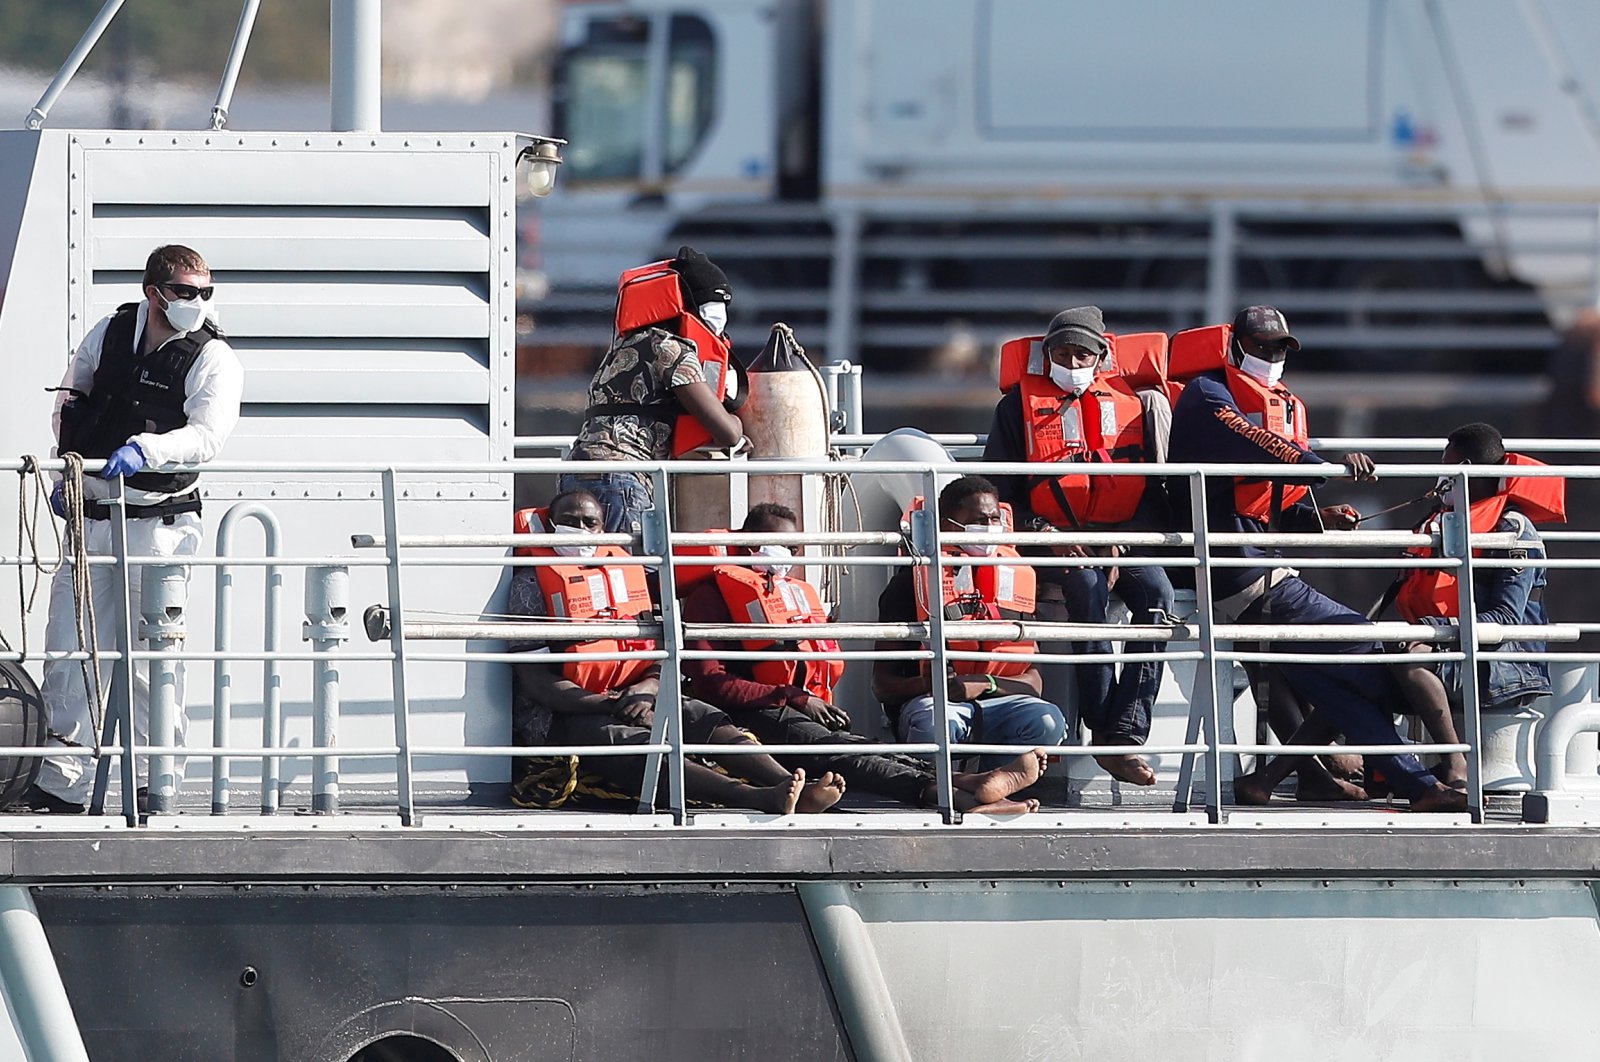 Migrants claiming to be from Darfur, Sudan sit on a Border Force vessel after being rescued as they crossed the English Channel in an inflatable boat near Dover, Britain, August 4, 2021. (Reuters Photo)